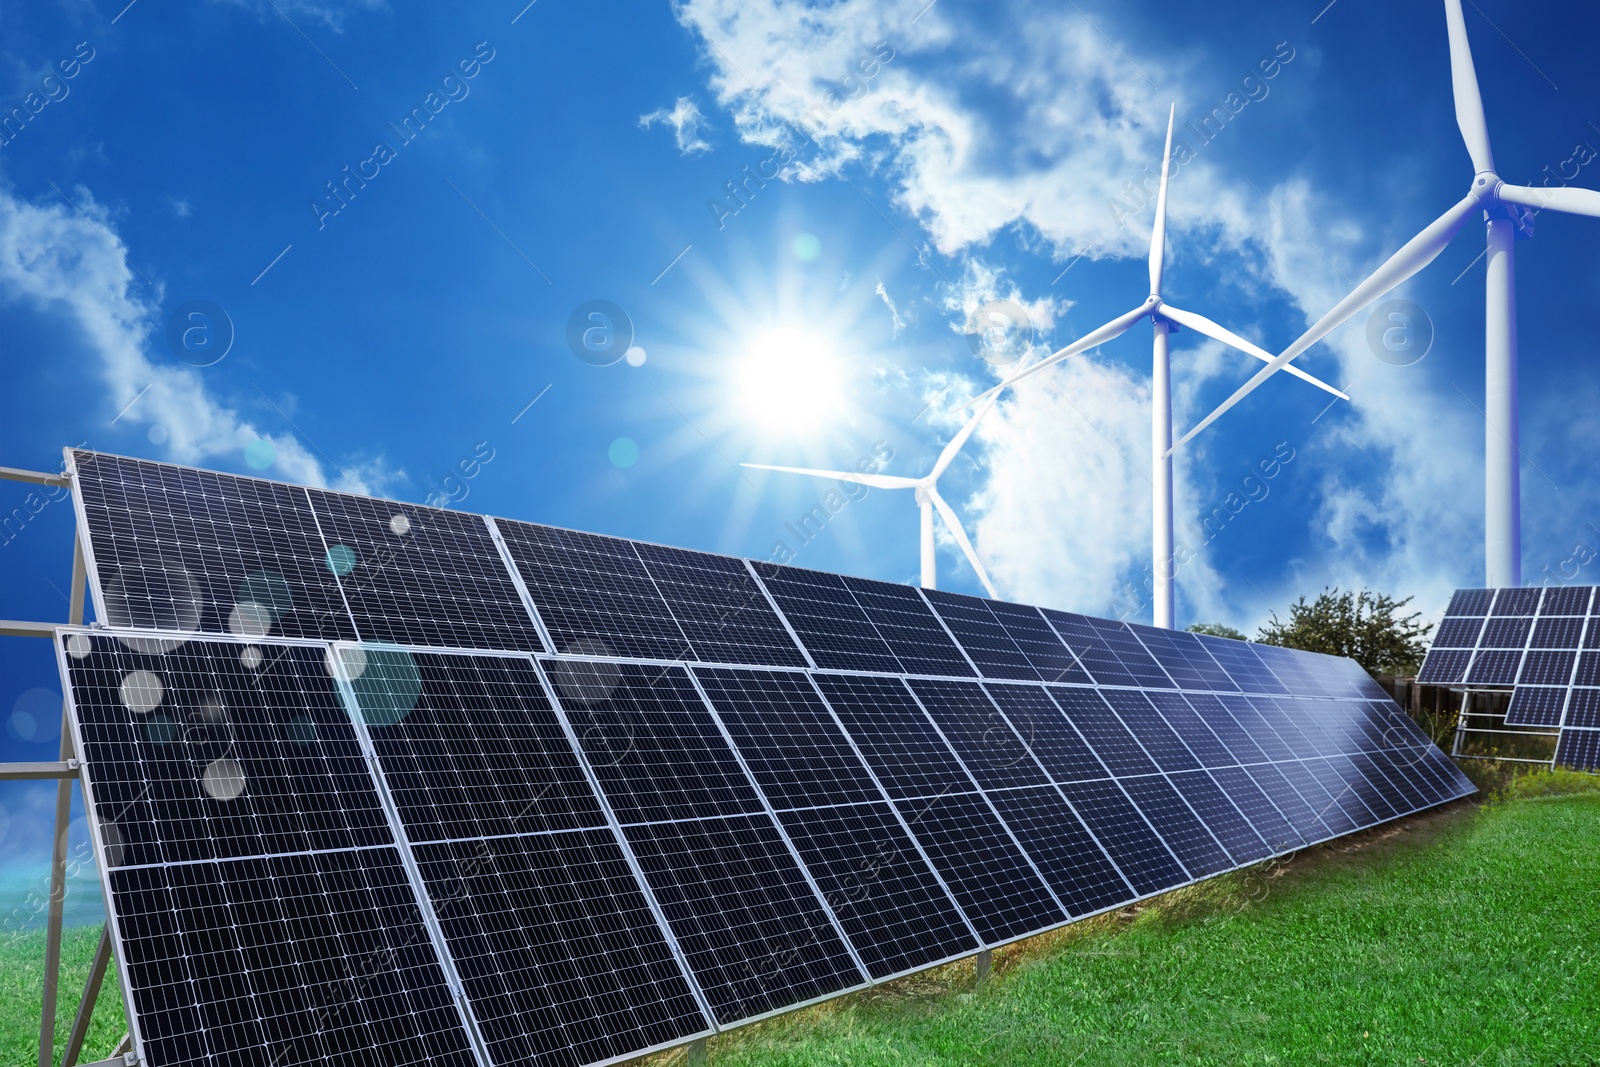 Image of Solar panels and wind turbines installed outdoors. Alternative energy source